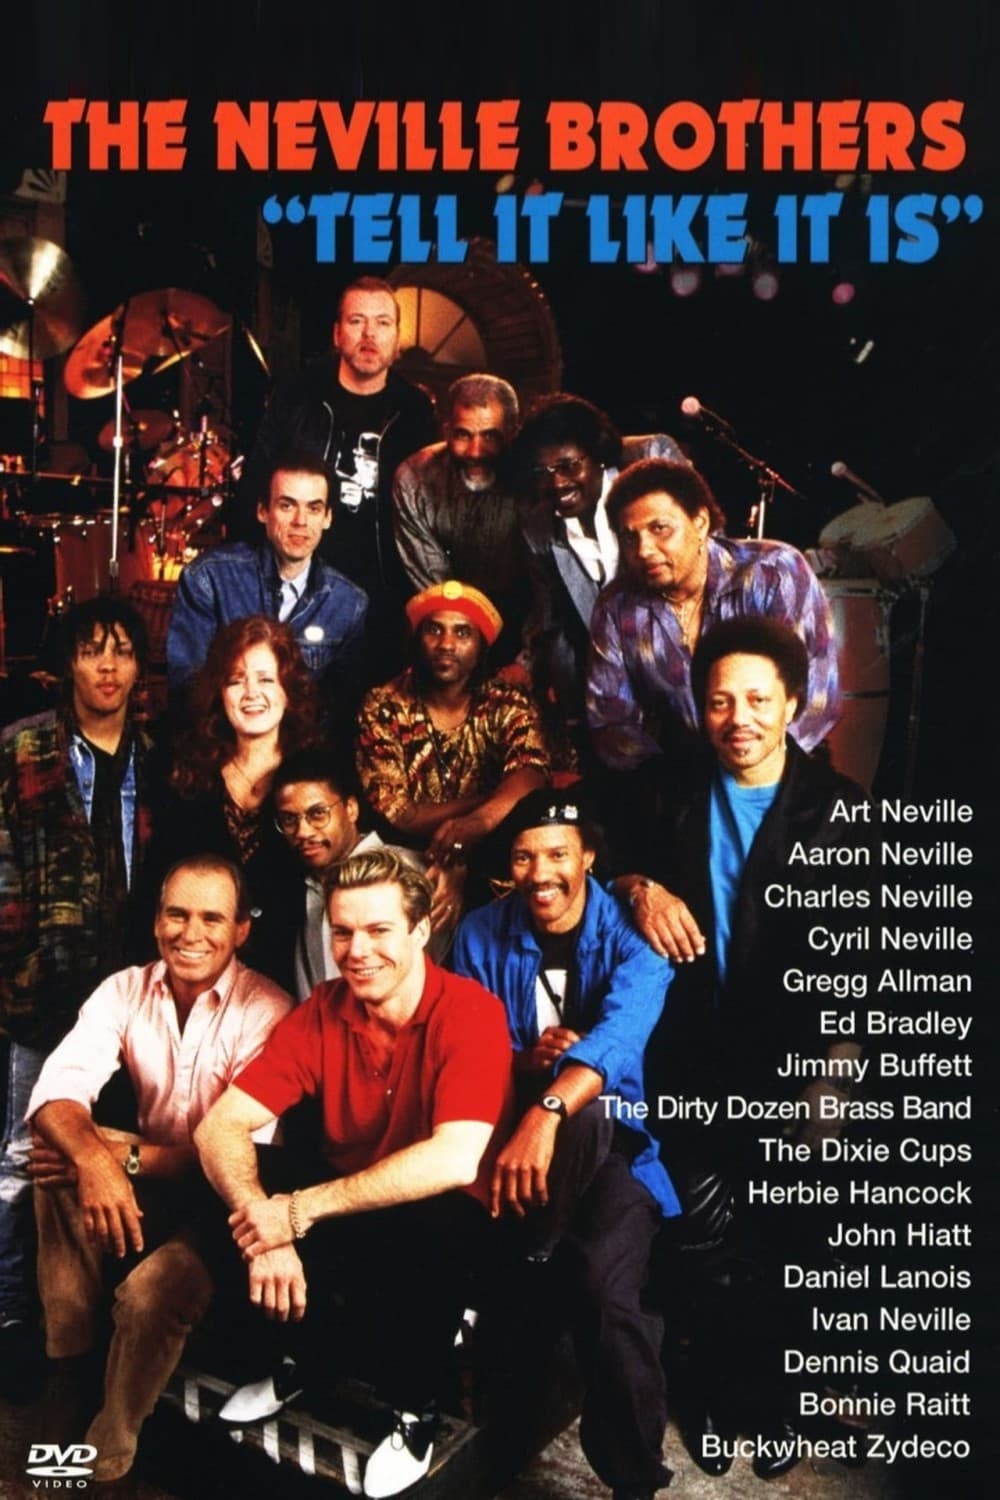 The Neville Brothers and Friends